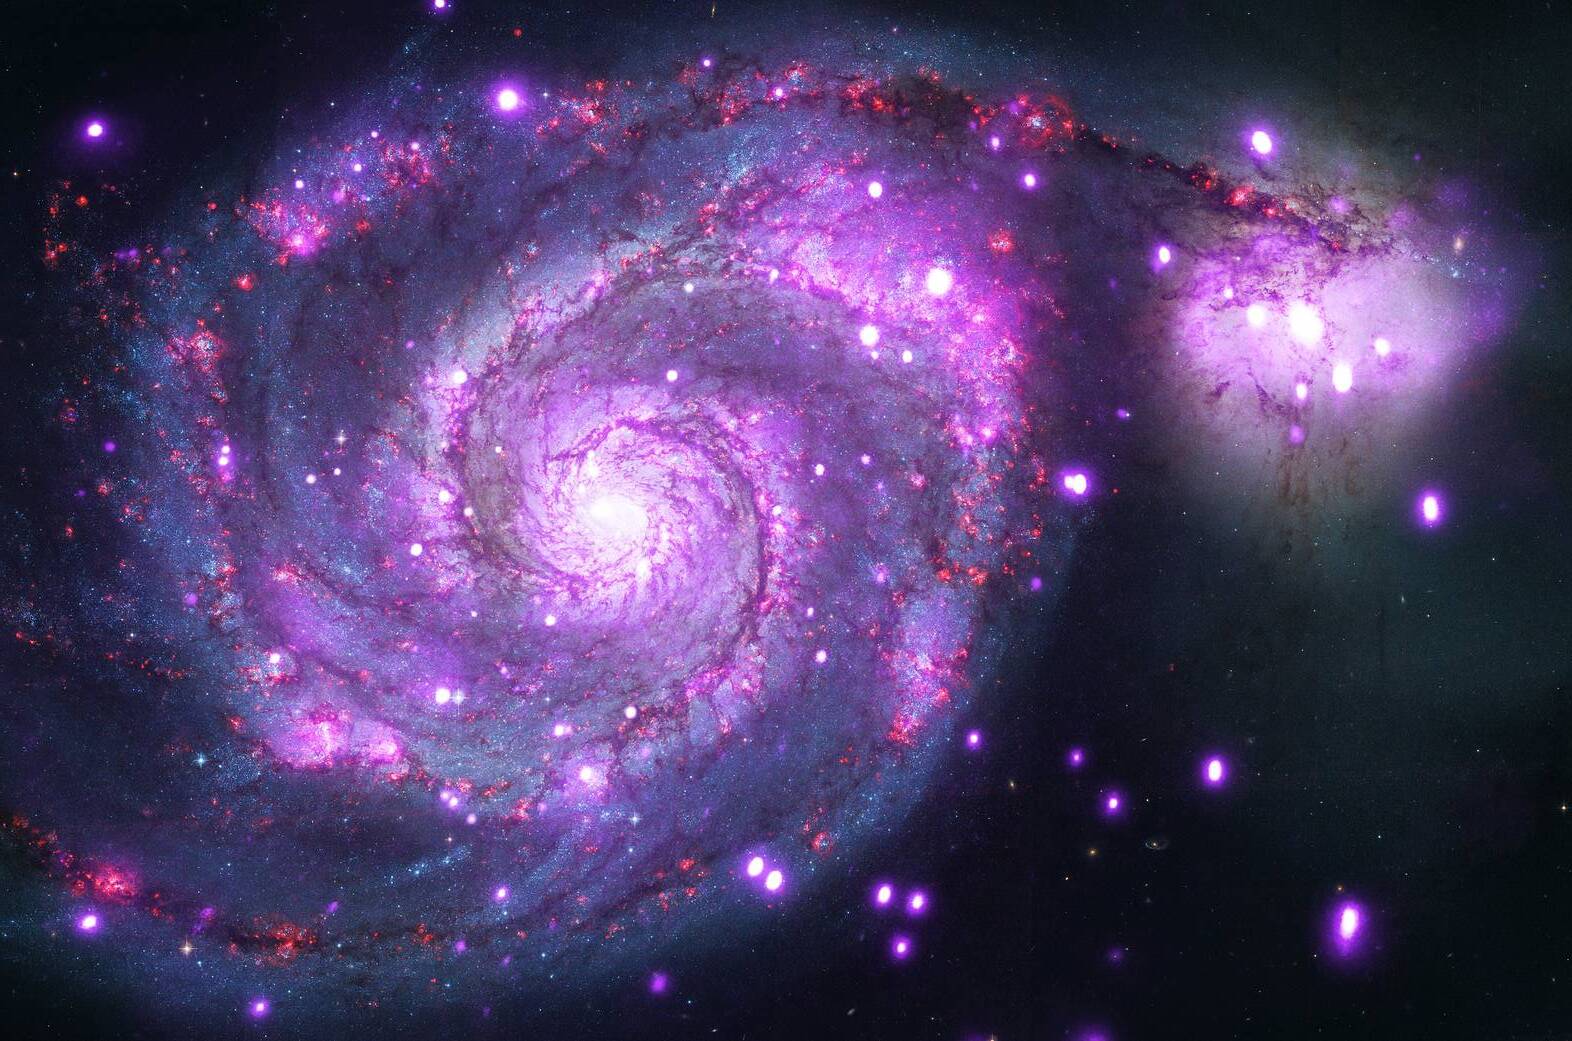 An image of the 'whirlpool' galaxy as captured by NASA's Chandra X-ray Observatory.